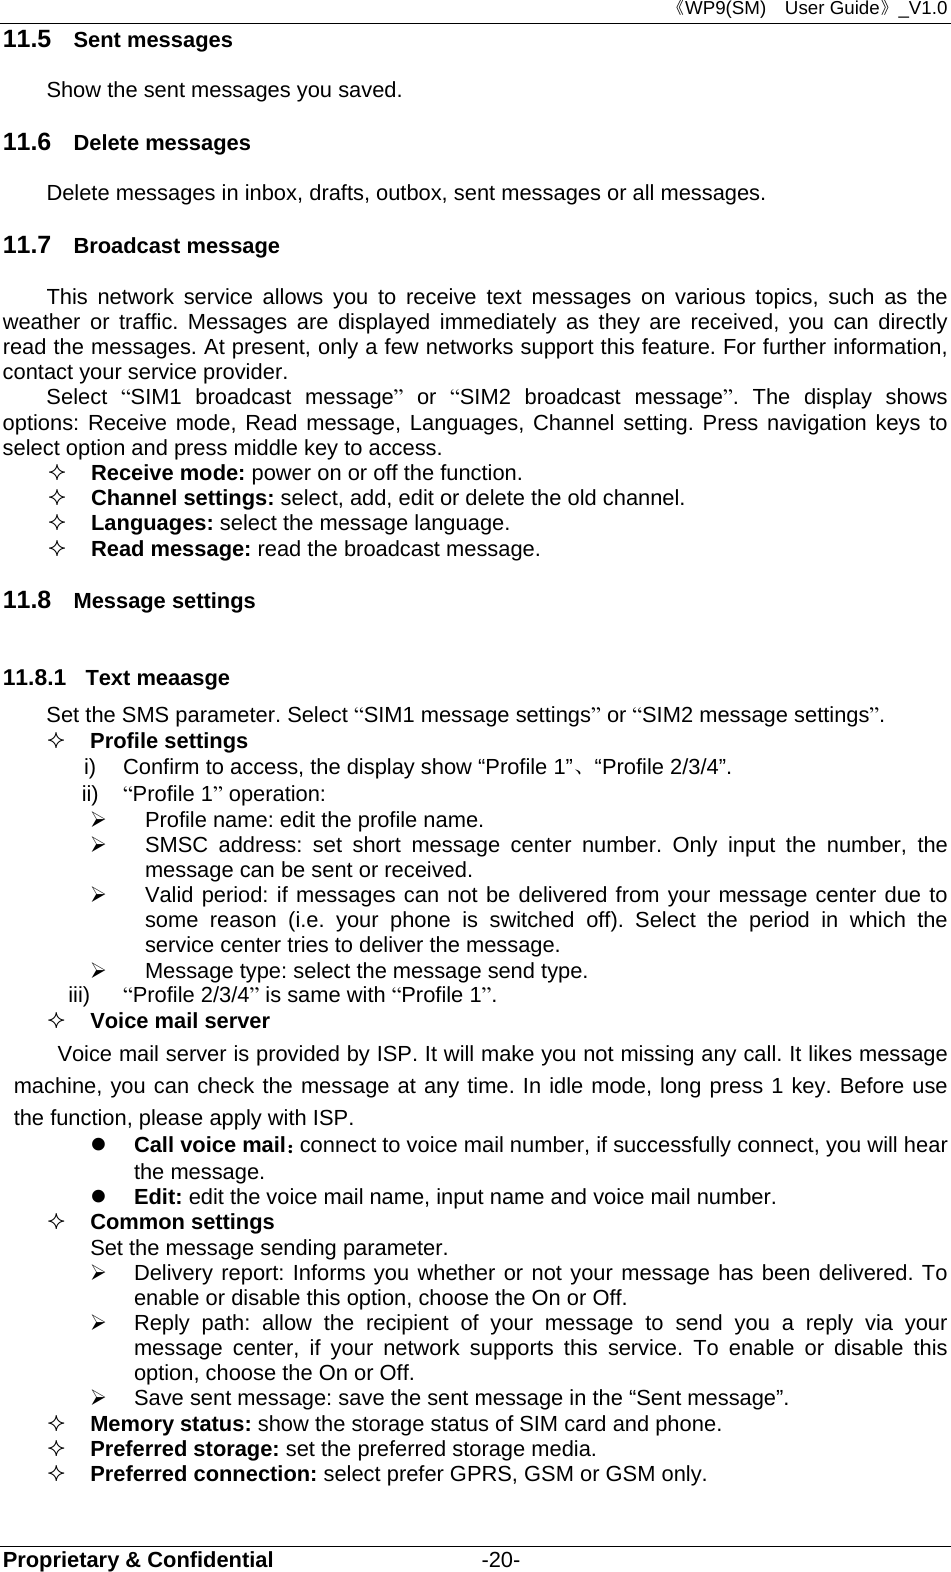 《WP9(SM)  User Guide》_V1.0 Proprietary &amp; Confidential                   -20- 11.5  Sent messages Show the sent messages you saved. 11.6  Delete messages Delete messages in inbox, drafts, outbox, sent messages or all messages. 11.7  Broadcast message This network service allows you to receive text messages on various topics, such as the weather or traffic. Messages are displayed immediately as they are received, you can directly read the messages. At present, only a few networks support this feature. For further information, contact your service provider. Select  “SIM1 broadcast message” or “SIM2 broadcast message”. The display shows options: Receive mode, Read message, Languages, Channel setting. Press navigation keys to select option and press middle key to access.  Receive mode: power on or off the function.  Channel settings: select, add, edit or delete the old channel.  Languages: select the message language.  Read message: read the broadcast message. 11.8  Message settings 11.8.1  Text meaasge Set the SMS parameter. Select “SIM1 message settings” or “SIM2 message settings”.  Profile settings i)  Confirm to access, the display show “Profile 1”、“Profile 2/3/4”. ii)  “Profile 1” operation:     Profile name: edit the profile name.   SMSC address: set short message center number. Only input the number, the message can be sent or received.   Valid period: if messages can not be delivered from your message center due to some reason (i.e. your phone is switched off). Select the period in which the service center tries to deliver the message.   Message type: select the message send type. iii)  “Profile 2/3/4” is same with “Profile 1”.  Voice mail server Voice mail server is provided by ISP. It will make you not missing any call. It likes message machine, you can check the message at any time. In idle mode, long press 1 key. Before use the function, please apply with ISP.    Call voice mail：connect to voice mail number, if successfully connect, you will hear the message.  Edit: edit the voice mail name, input name and voice mail number.  Common settings Set the message sending parameter.   Delivery report: Informs you whether or not your message has been delivered. To enable or disable this option, choose the On or Off.   Reply path: allow the recipient of your message to send you a reply via your message center, if your network supports this service. To enable or disable this option, choose the On or Off.   Save sent message: save the sent message in the “Sent message”.  Memory status: show the storage status of SIM card and phone.  Preferred storage: set the preferred storage media.  Preferred connection: select prefer GPRS, GSM or GSM only.  